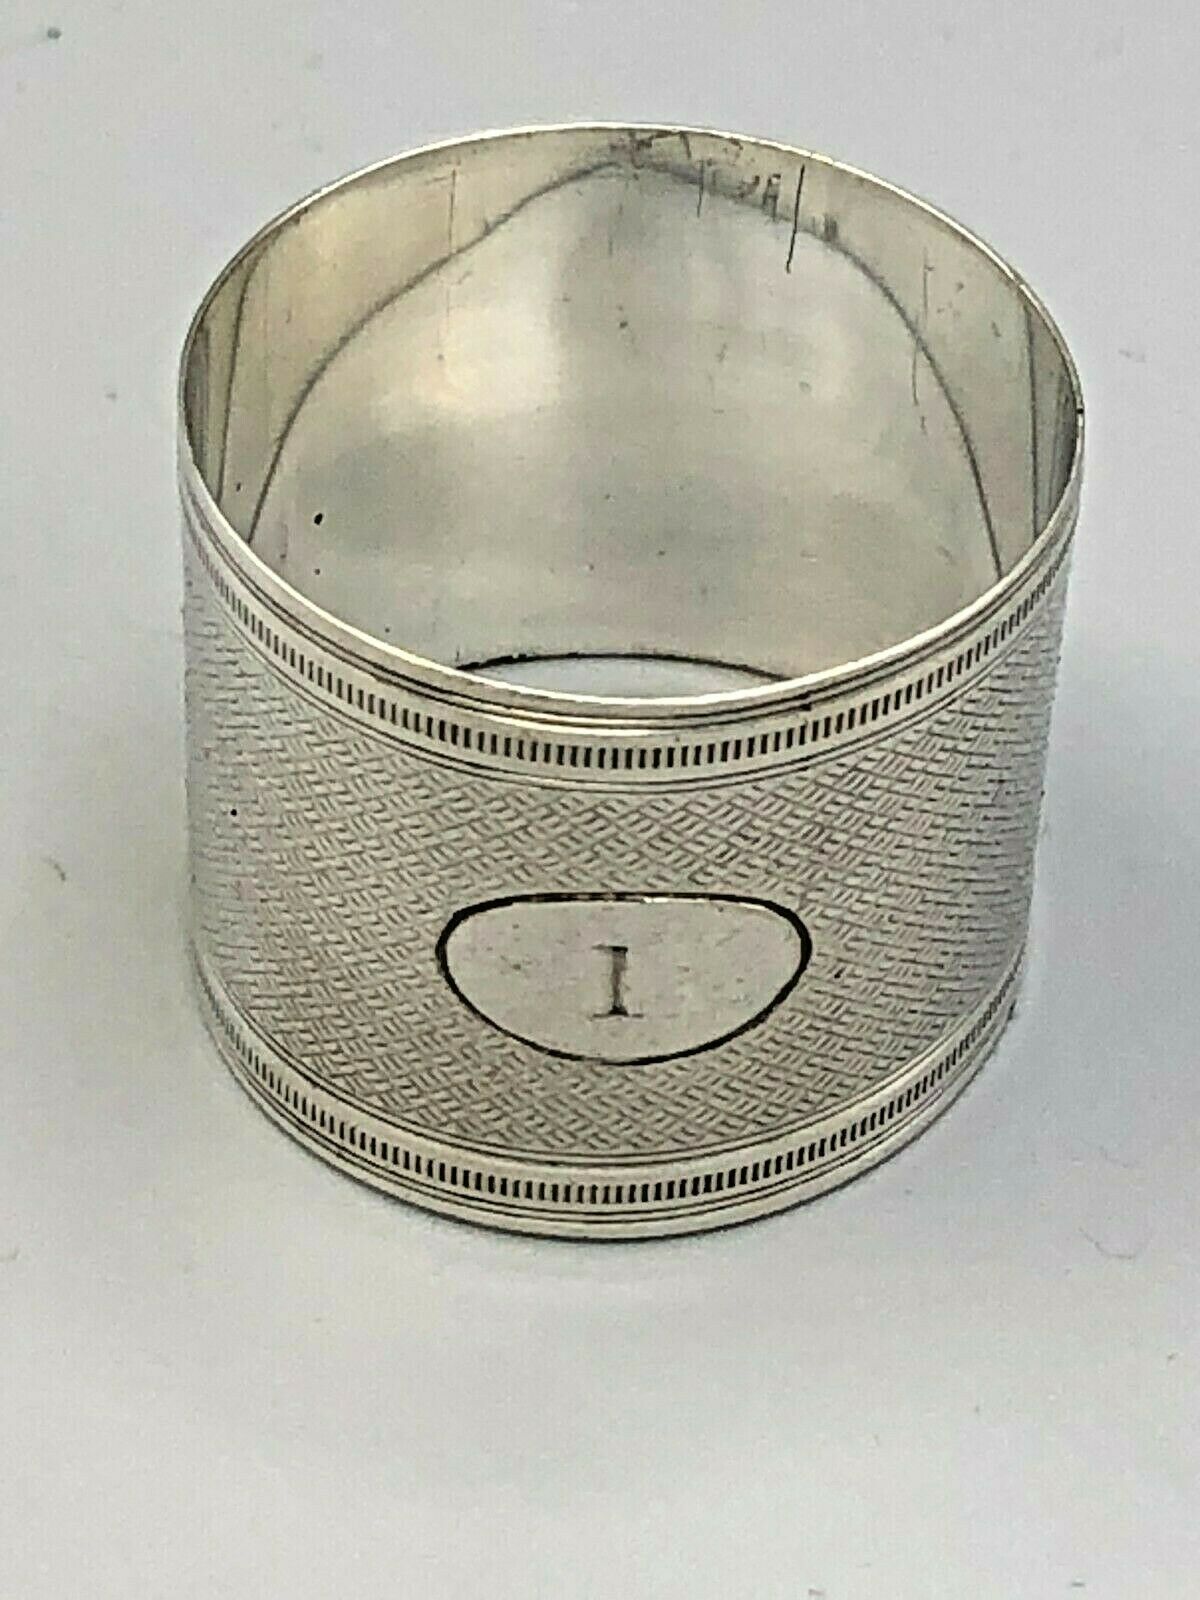 English Sterling Silver Napkin Ring 1.25" Wide, With #1 Engraved On It